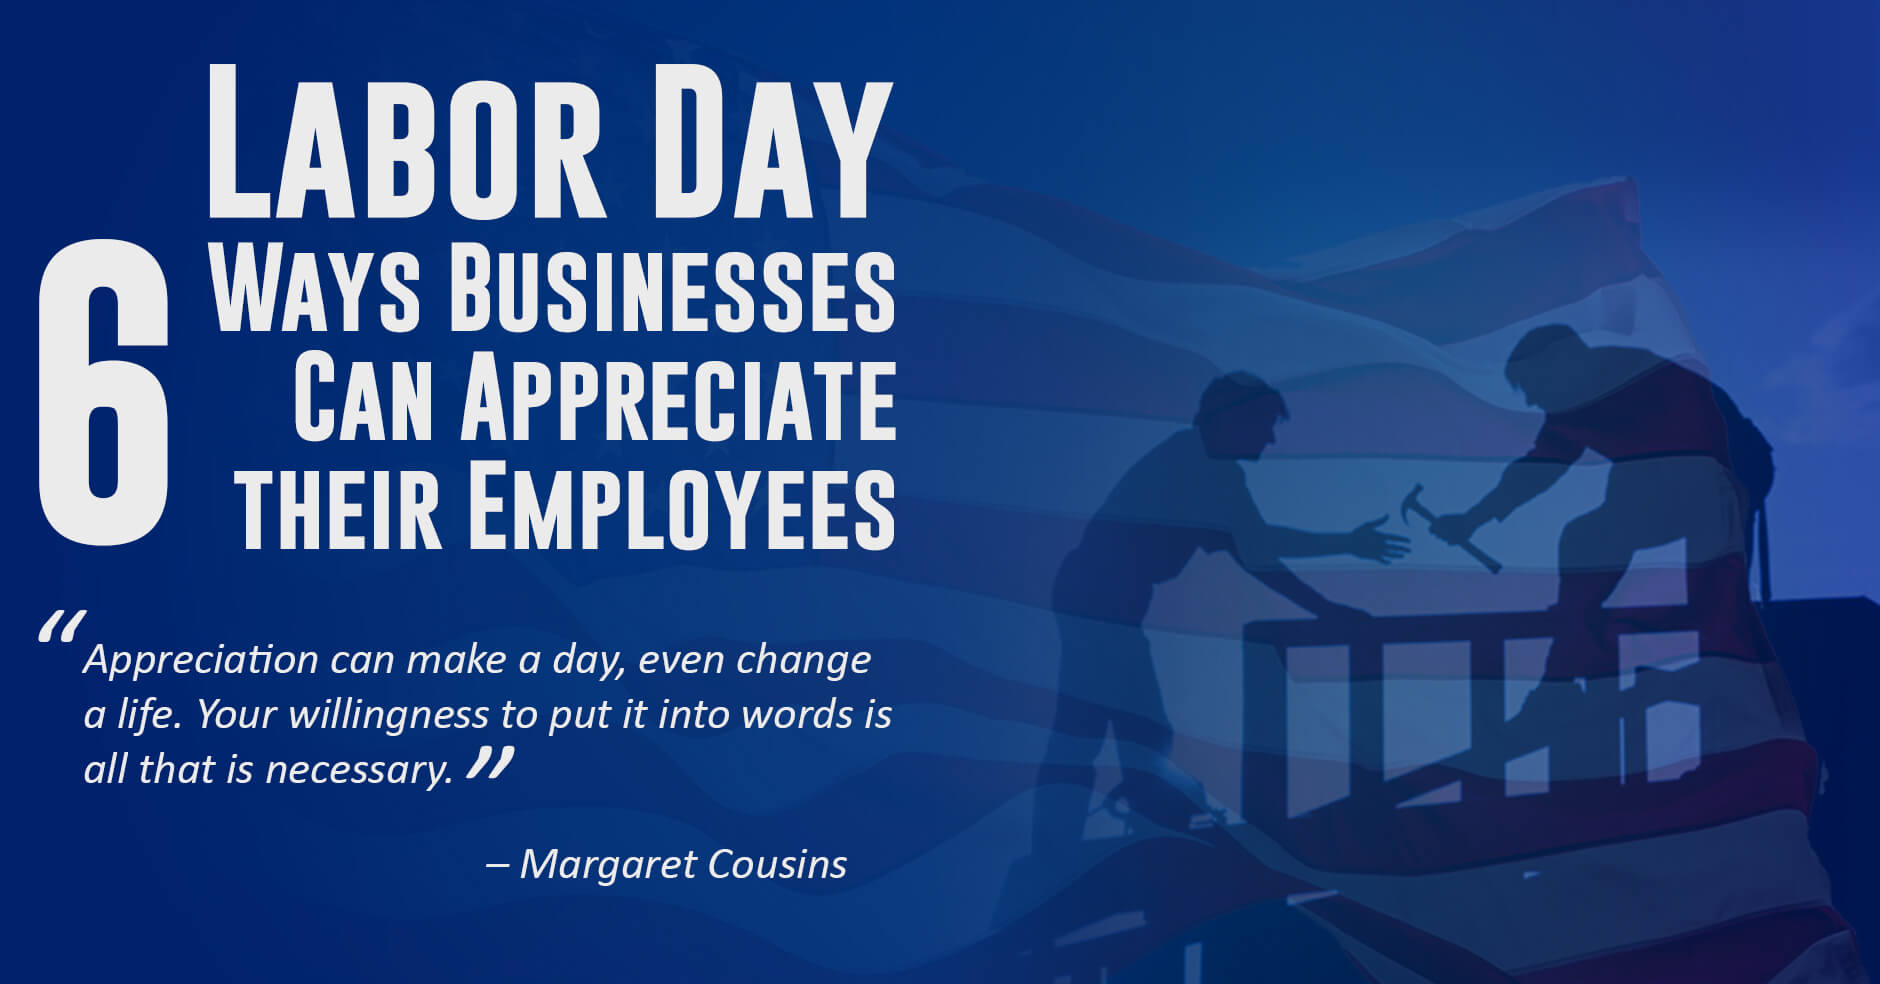 Labor Day – 6 Ways Businesses Can Appreciate their Employees